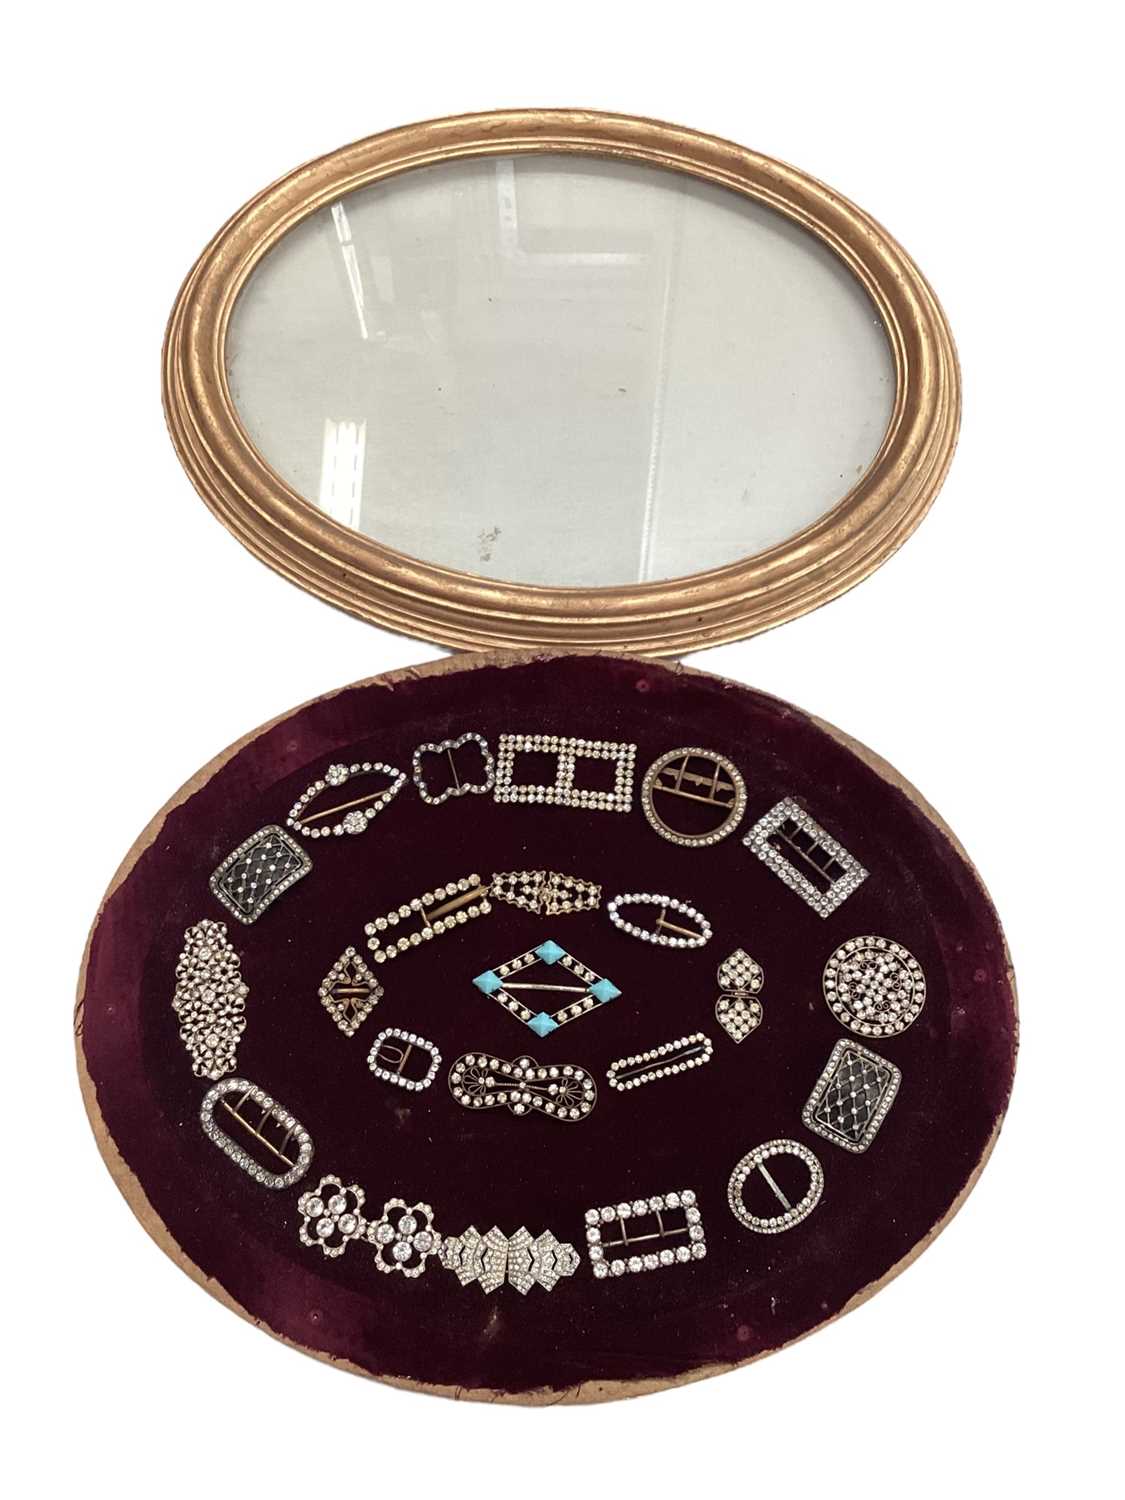 A group of paste and enamel buckles and clips mounted on velvet and in oval glazed frame. - Image 2 of 2